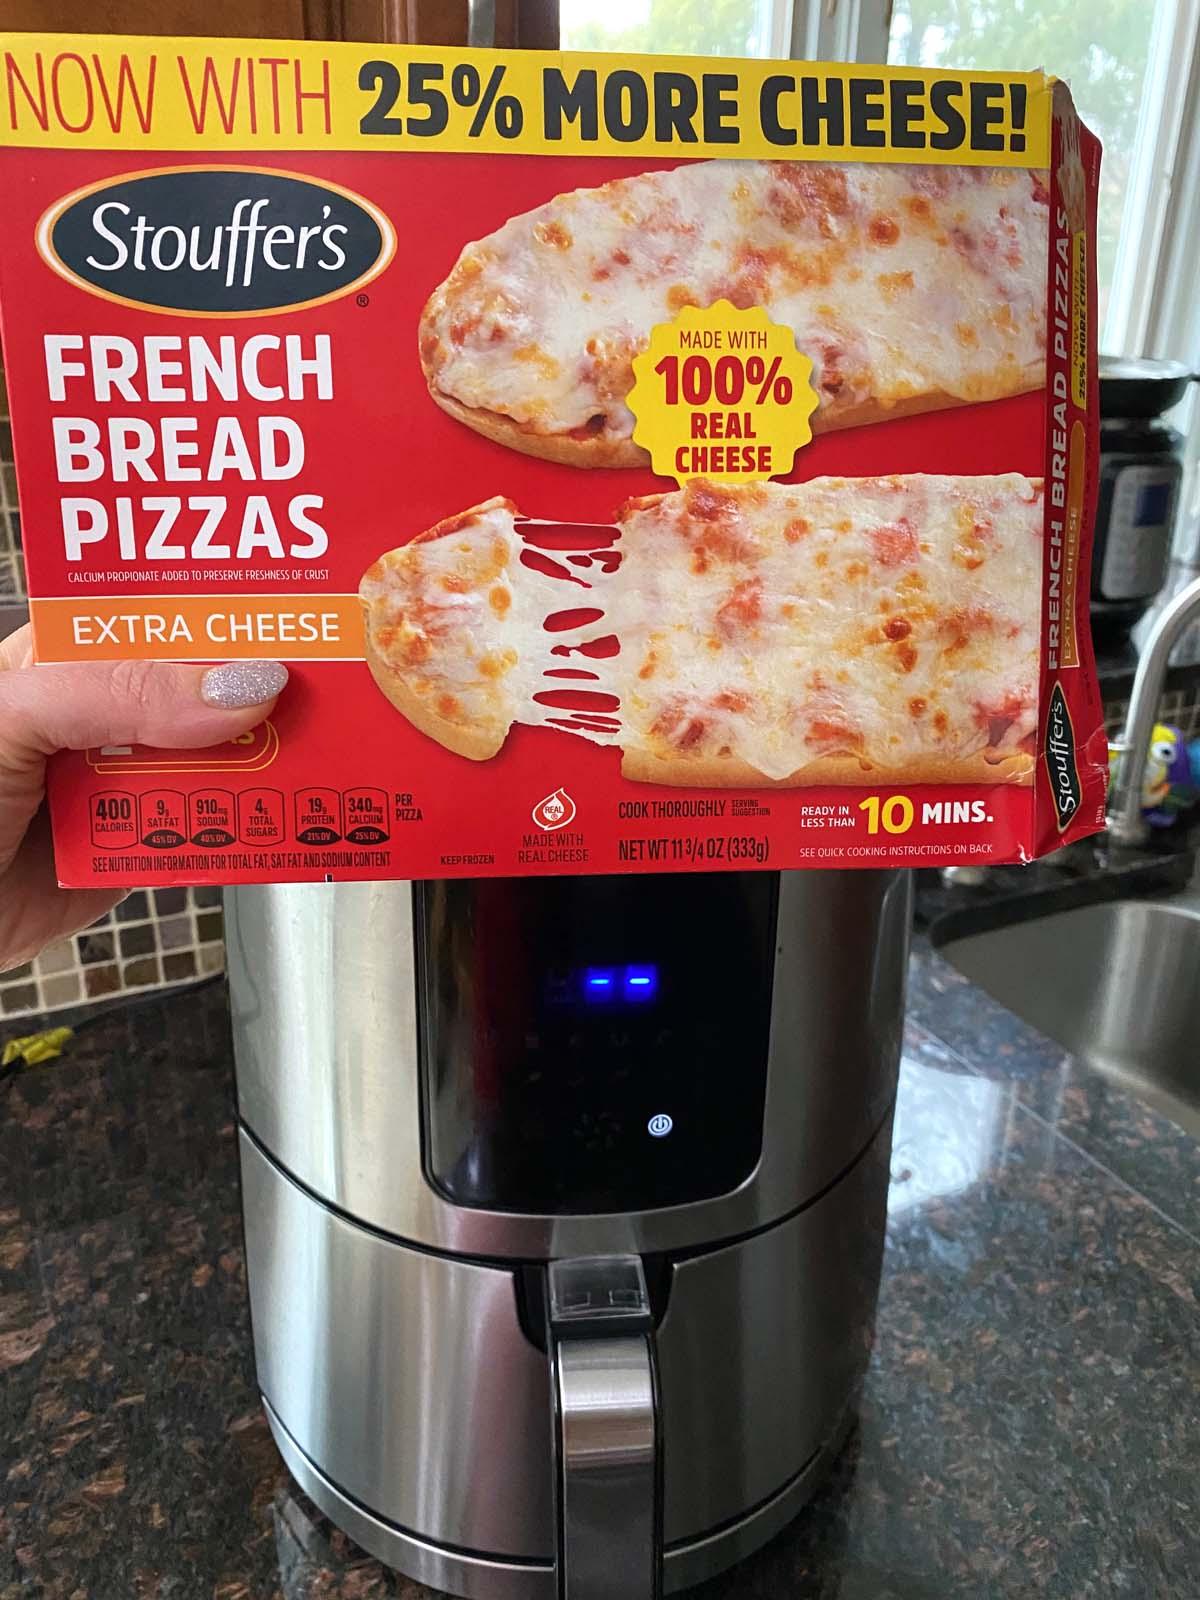 Box of French bread pizza in front of an air fryer.